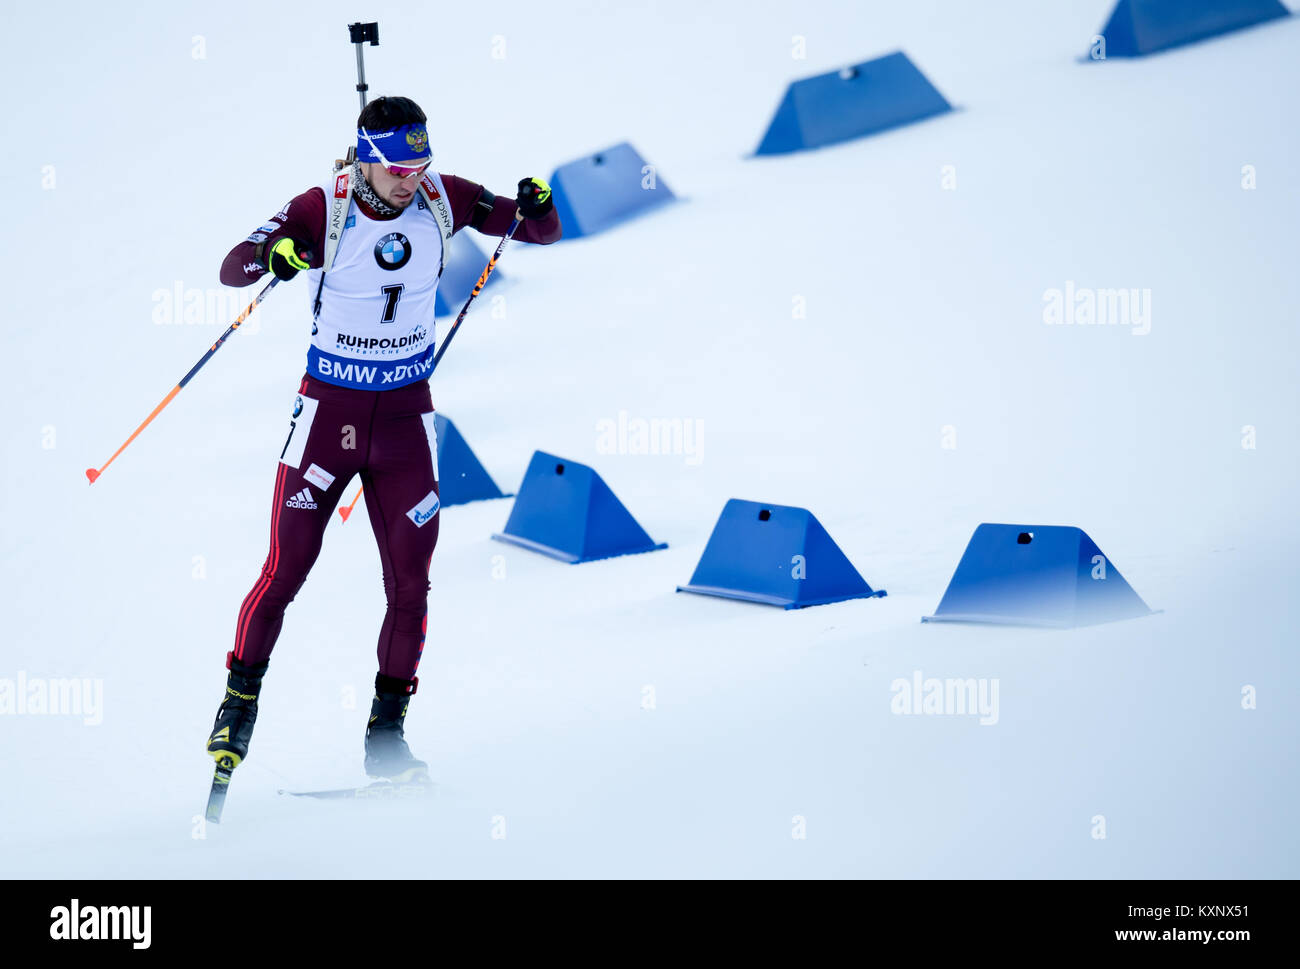 Ruhpolding, Germany. 10th Jan, 2018. Biathlete Alexander Loginow from Rusia skis during the race at Chiemgau Arena in Ruhpolding, Germany, 10 January 2018. Credit: Sven Hoppe/dpa/Alamy Live News Stock Photo